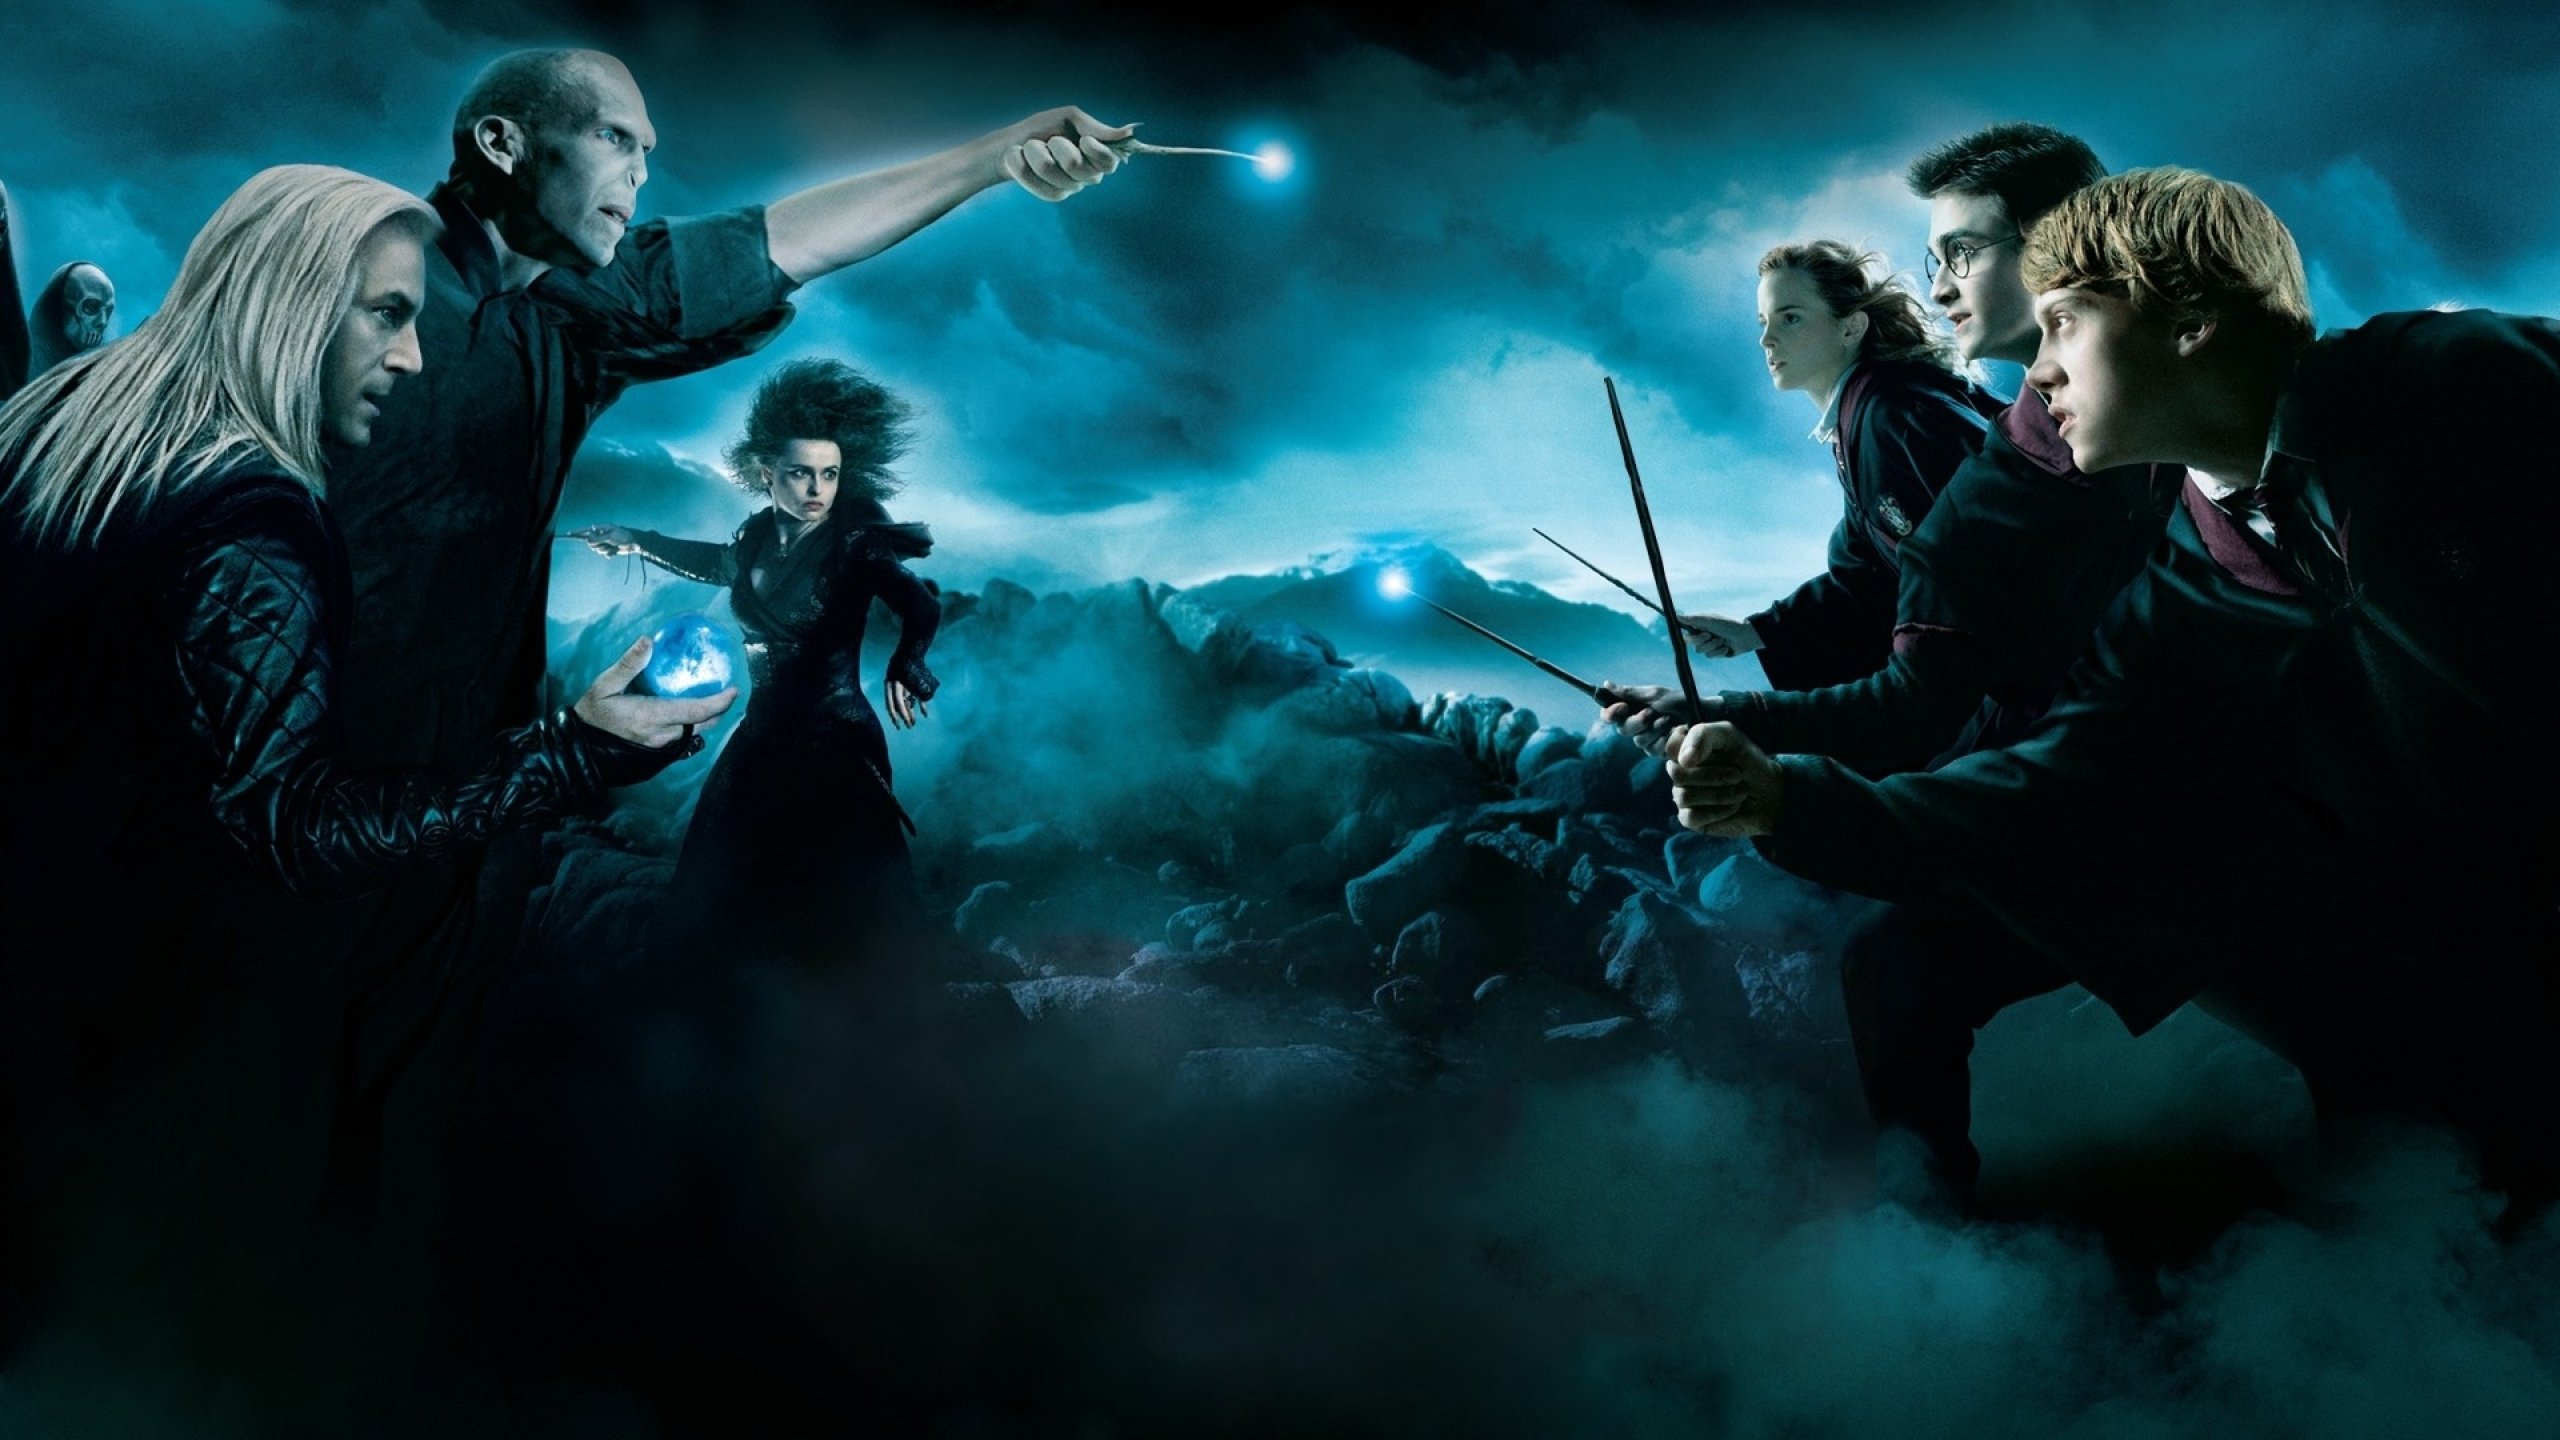 Harry Potter Cool Wallpapers